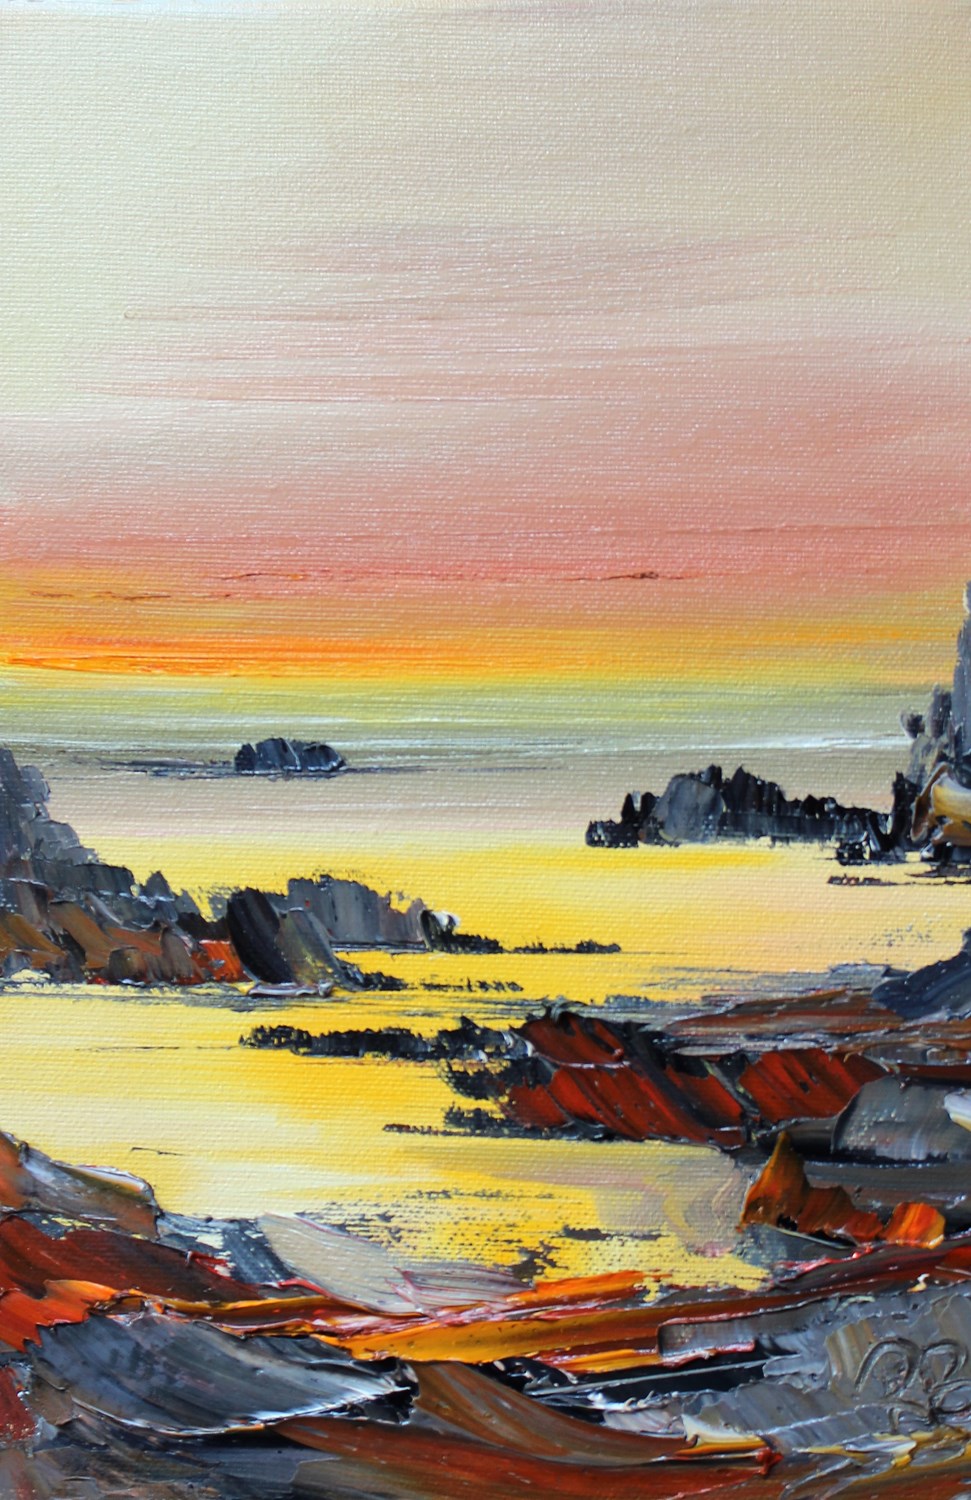 'Clambering over the rocks at sunset' by artist Rosanne Barr